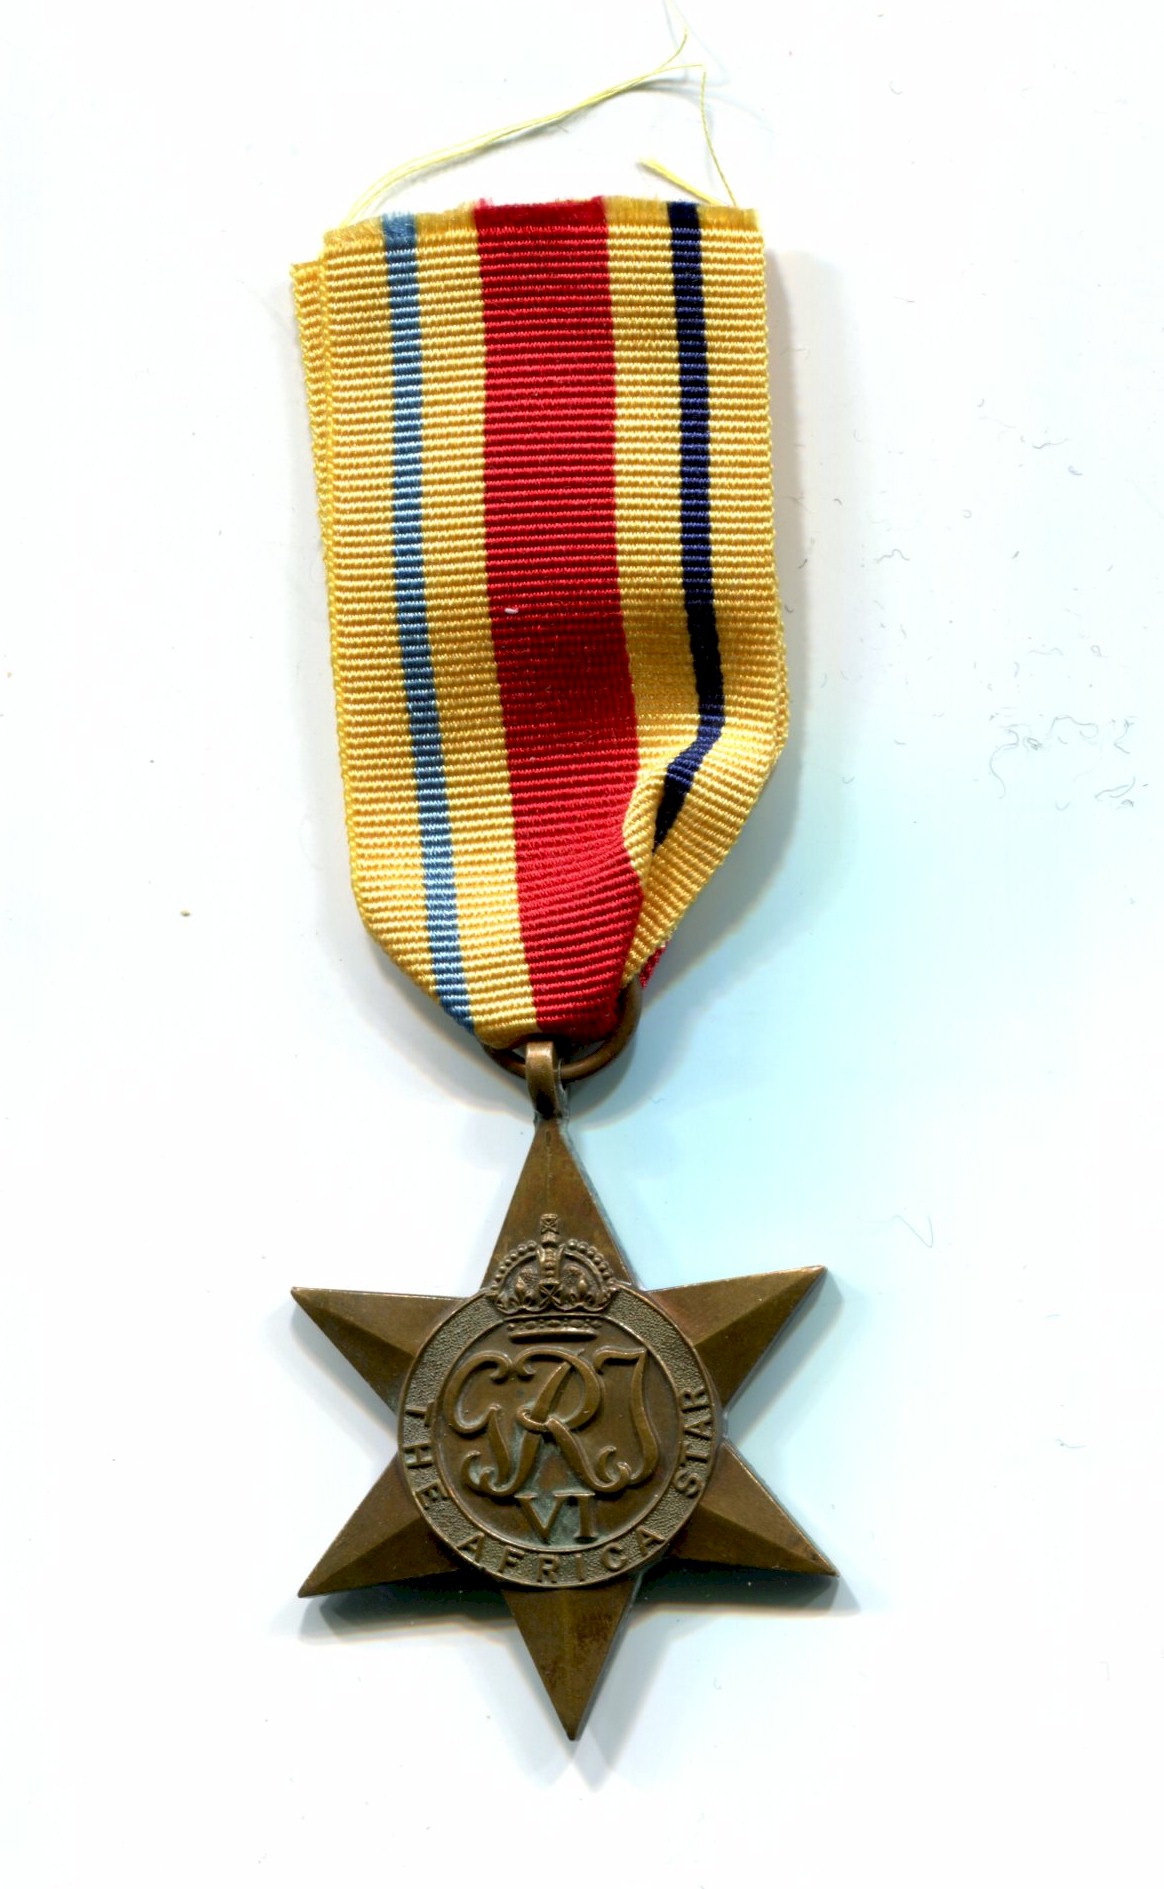 BRITISH CANADA WWII AFRICA STAR MEDAL FOR ACTIVE SERVICE AGAINST ROMMEL IN THE DESERT